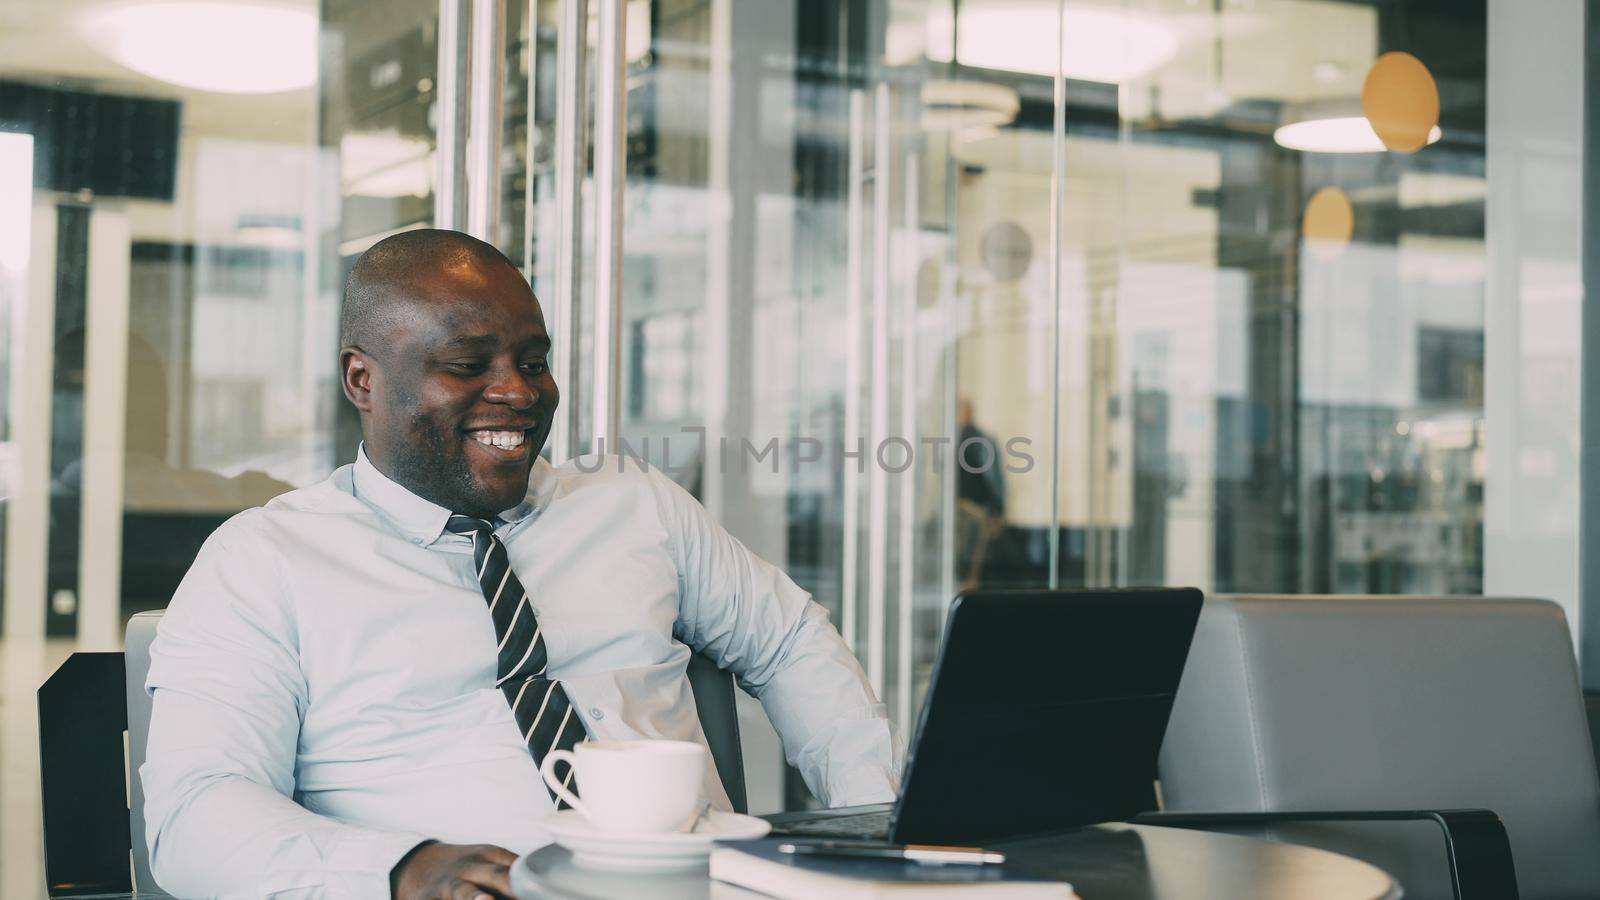 Portrait of hilarious African American businessman in formal clothes smiling, printing and working on his laptop in airy cafe during lunch break.